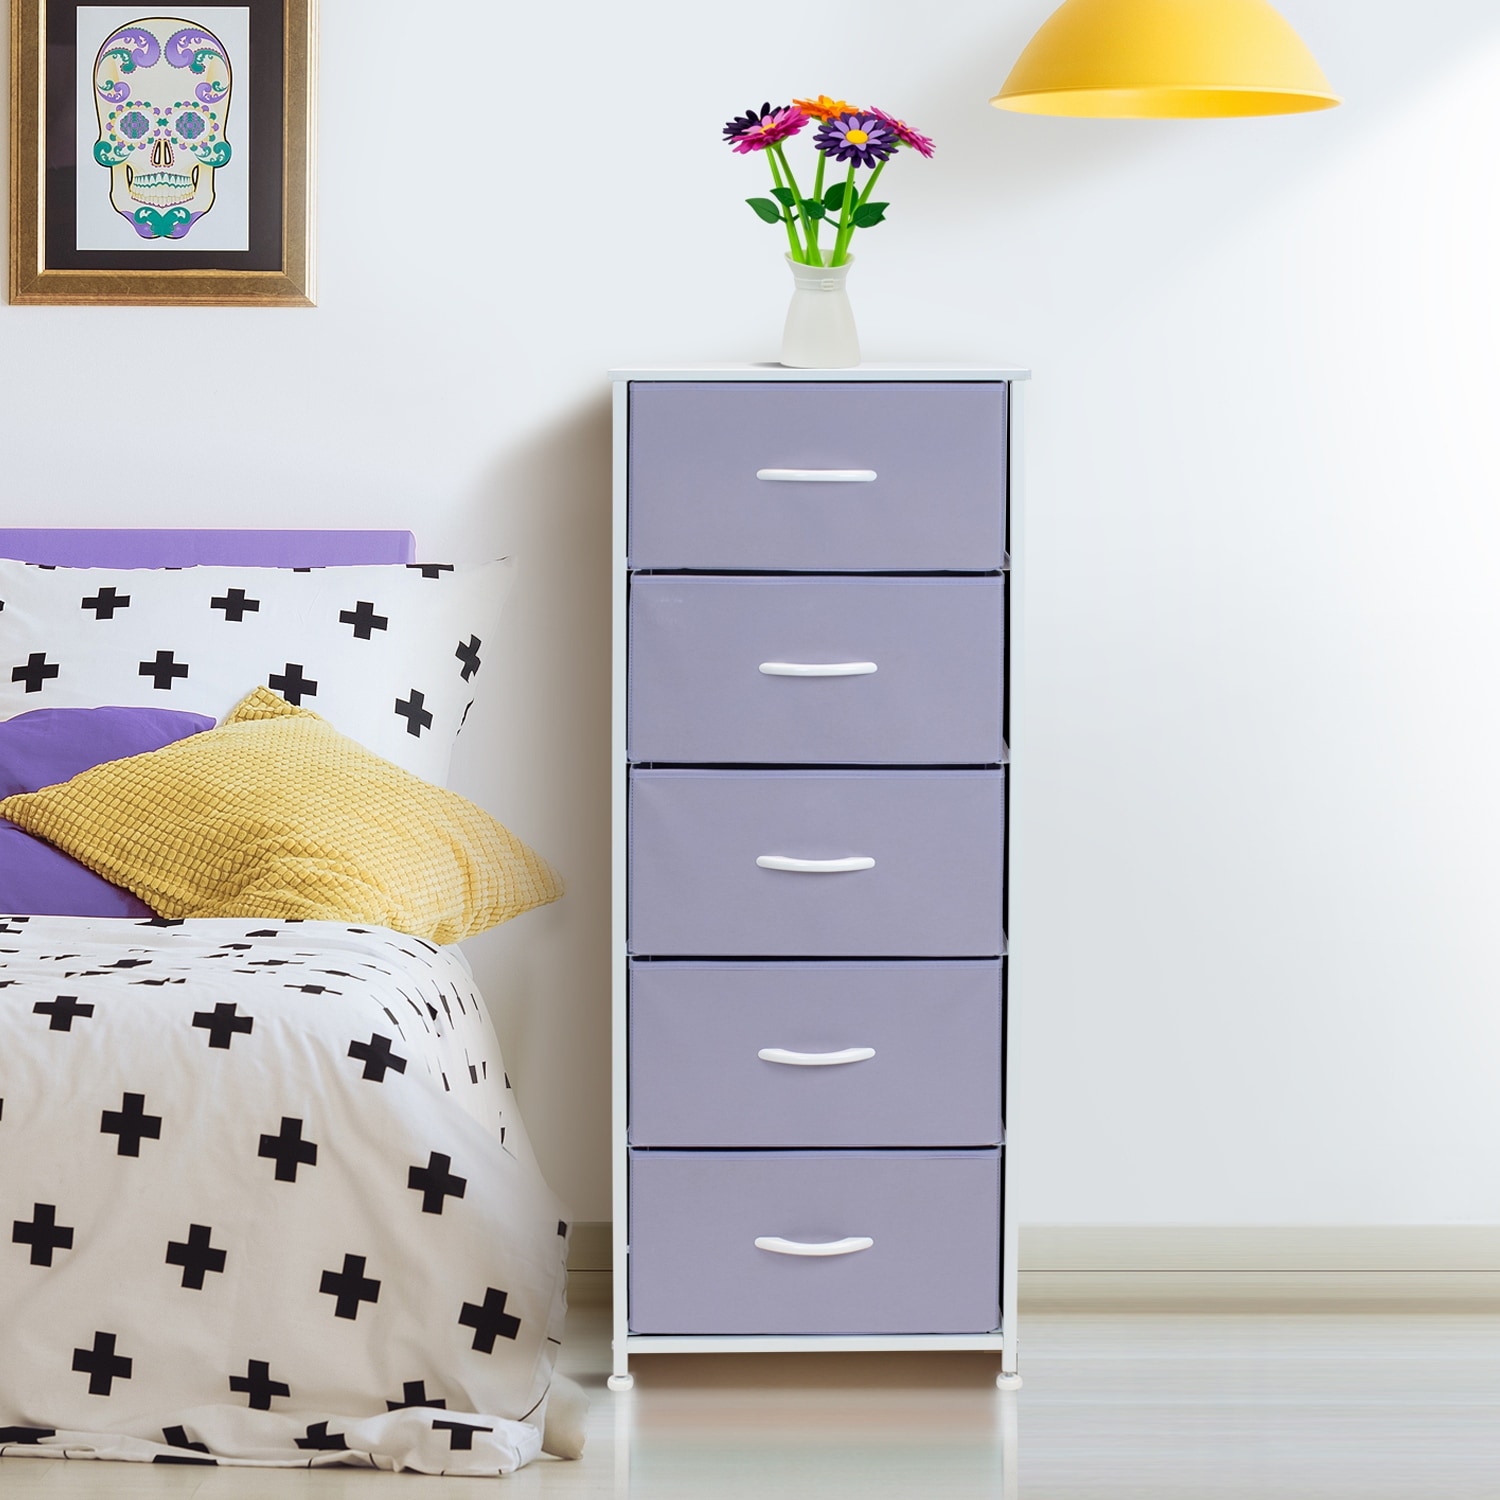 https://ak1.ostkcdn.com/images/products/is/images/direct/43f264a166bfd0306495f3de44355d3da16a8c37/Dresser-w--5-Drawers-Furniture-Tall-Storage-Organizer-Unit-for-Bedroom.jpg